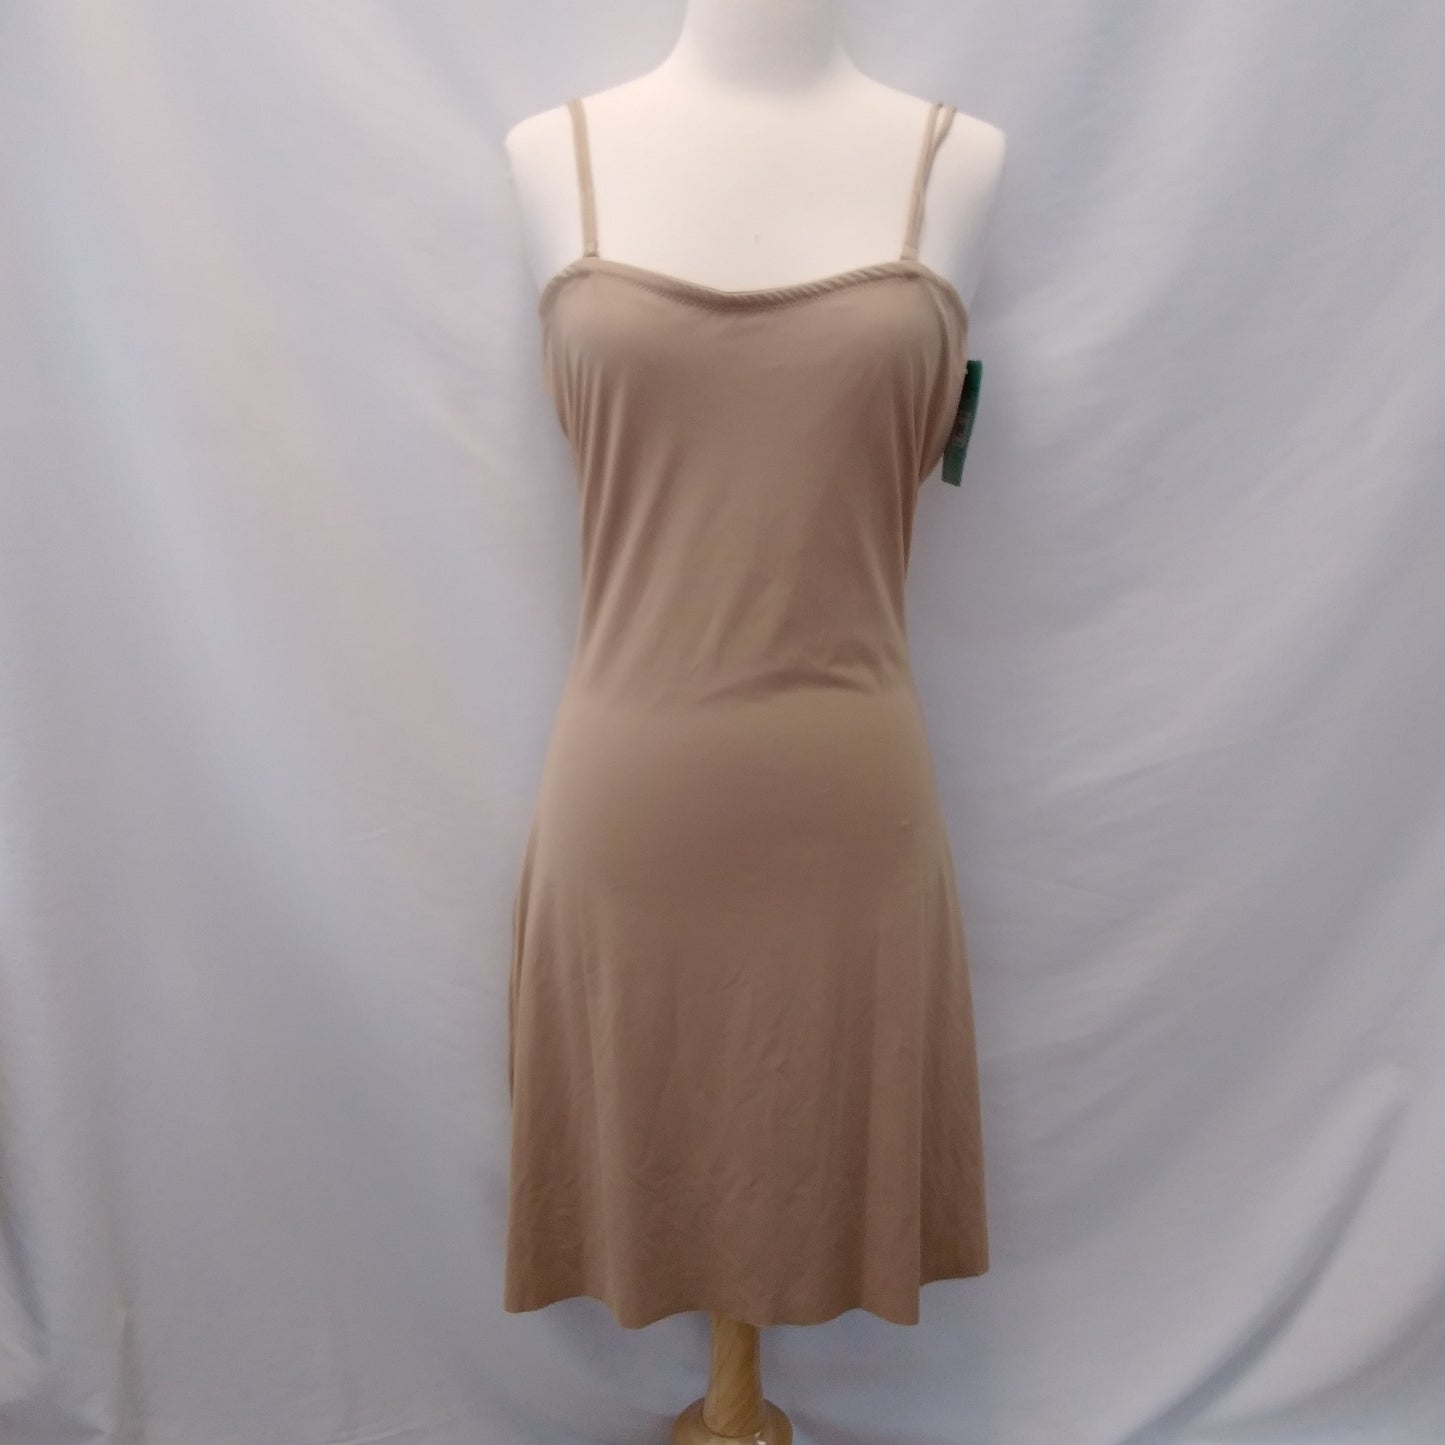 NWT - ASSETS by Sara Blakely nude Convertible Slip Dress - 2X